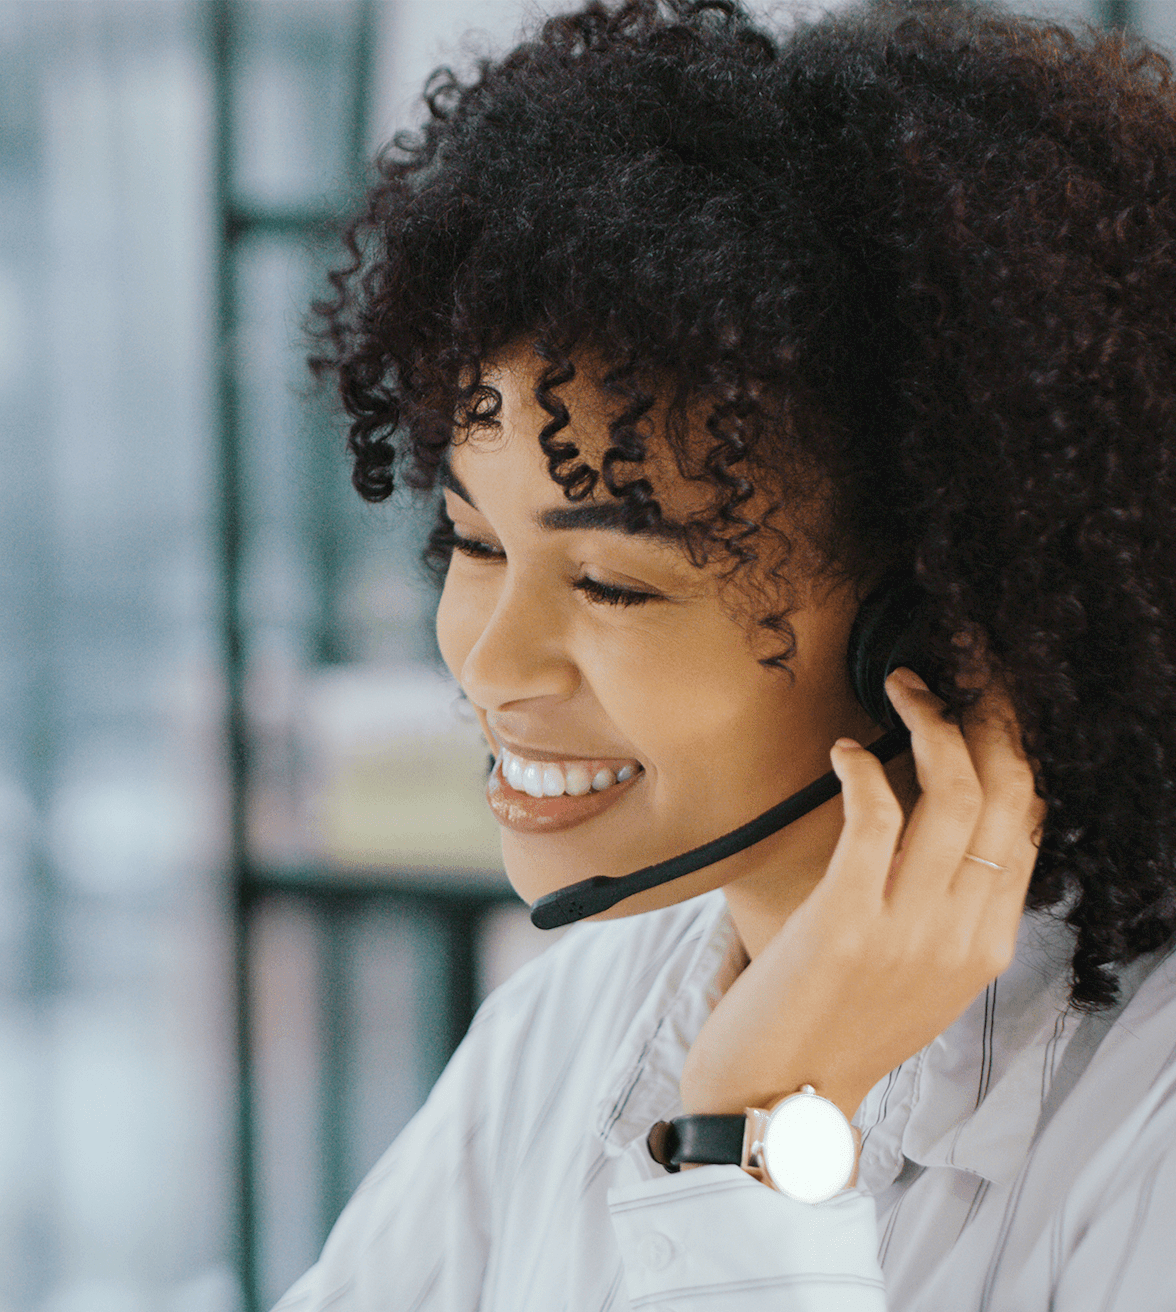 Woman smiling with call center headset